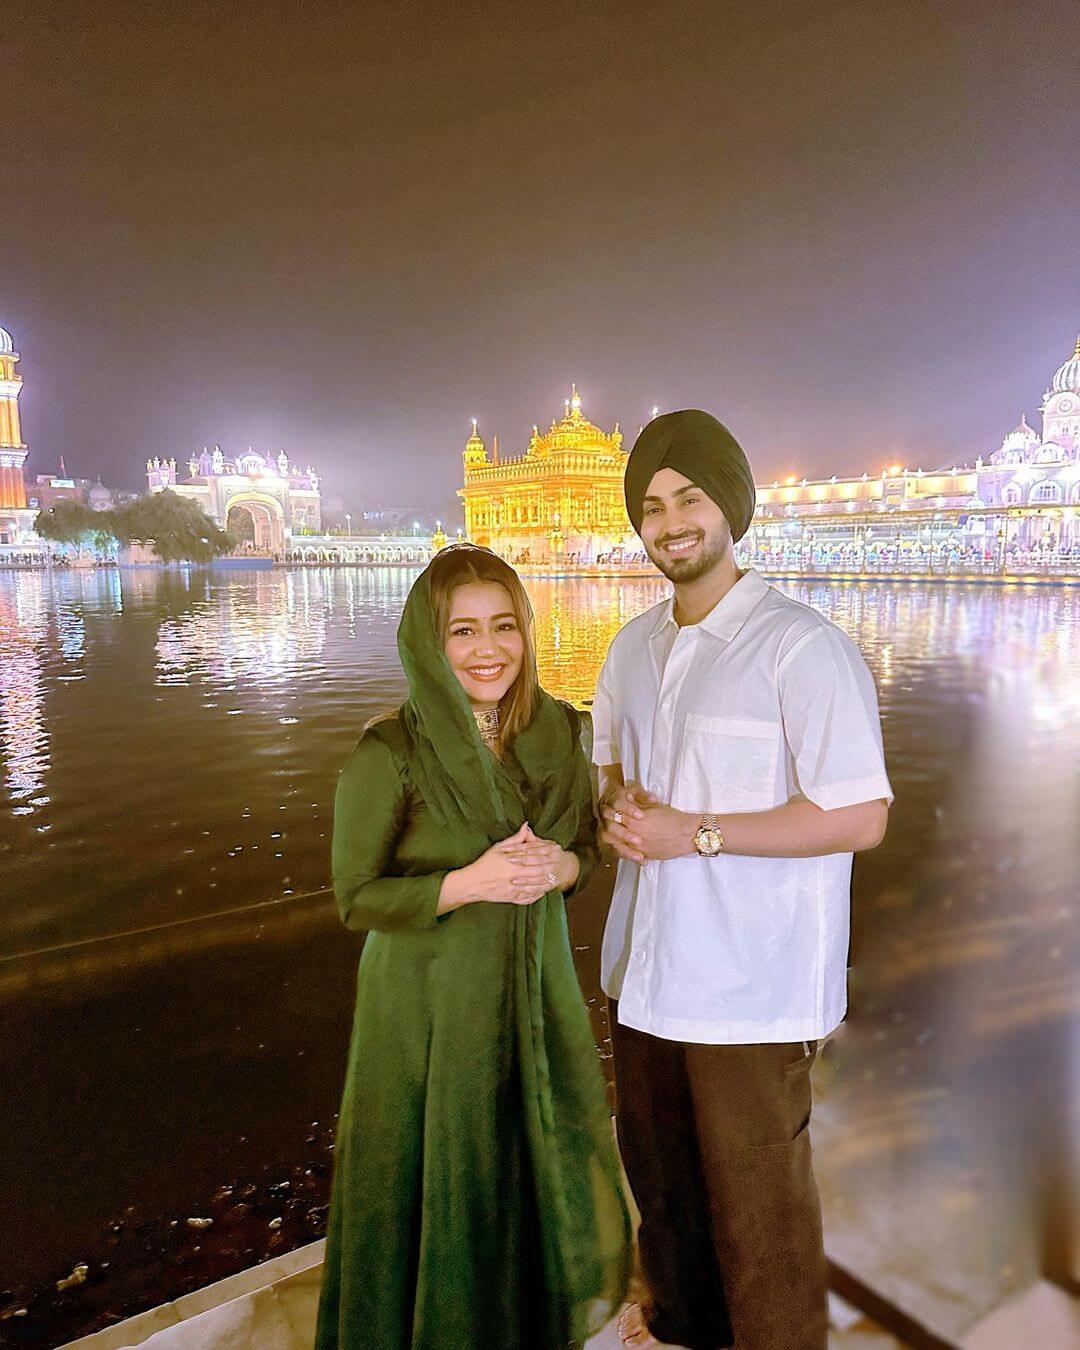 Neha and Rohanpreet in Indian Attire At The Golden Temple in Amritsar